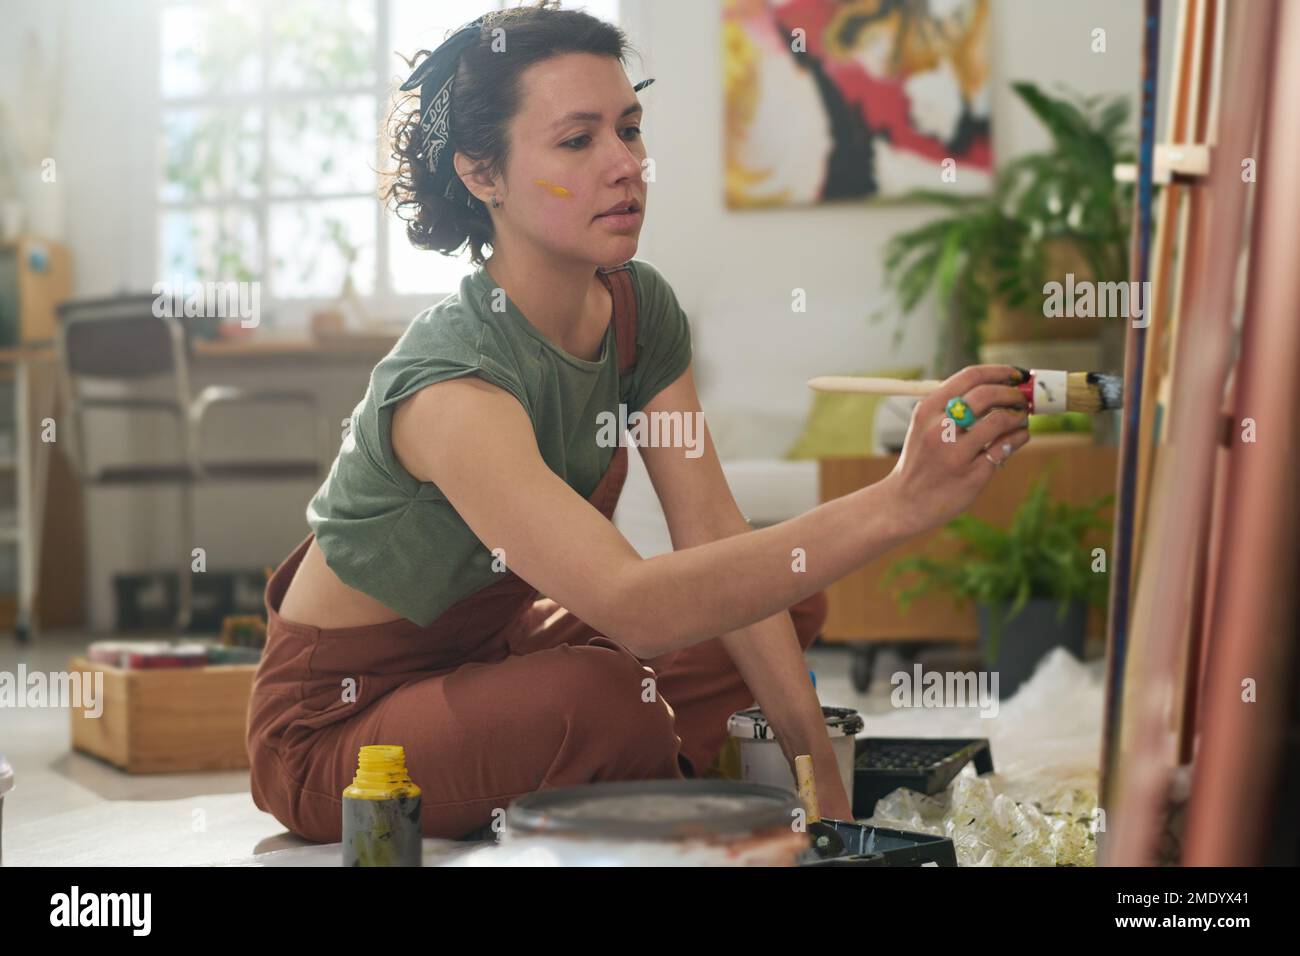 Young serious woman in casual apparel holding paintbrush during process of creating new artwork while sitting on the floor in studio Stock Photo